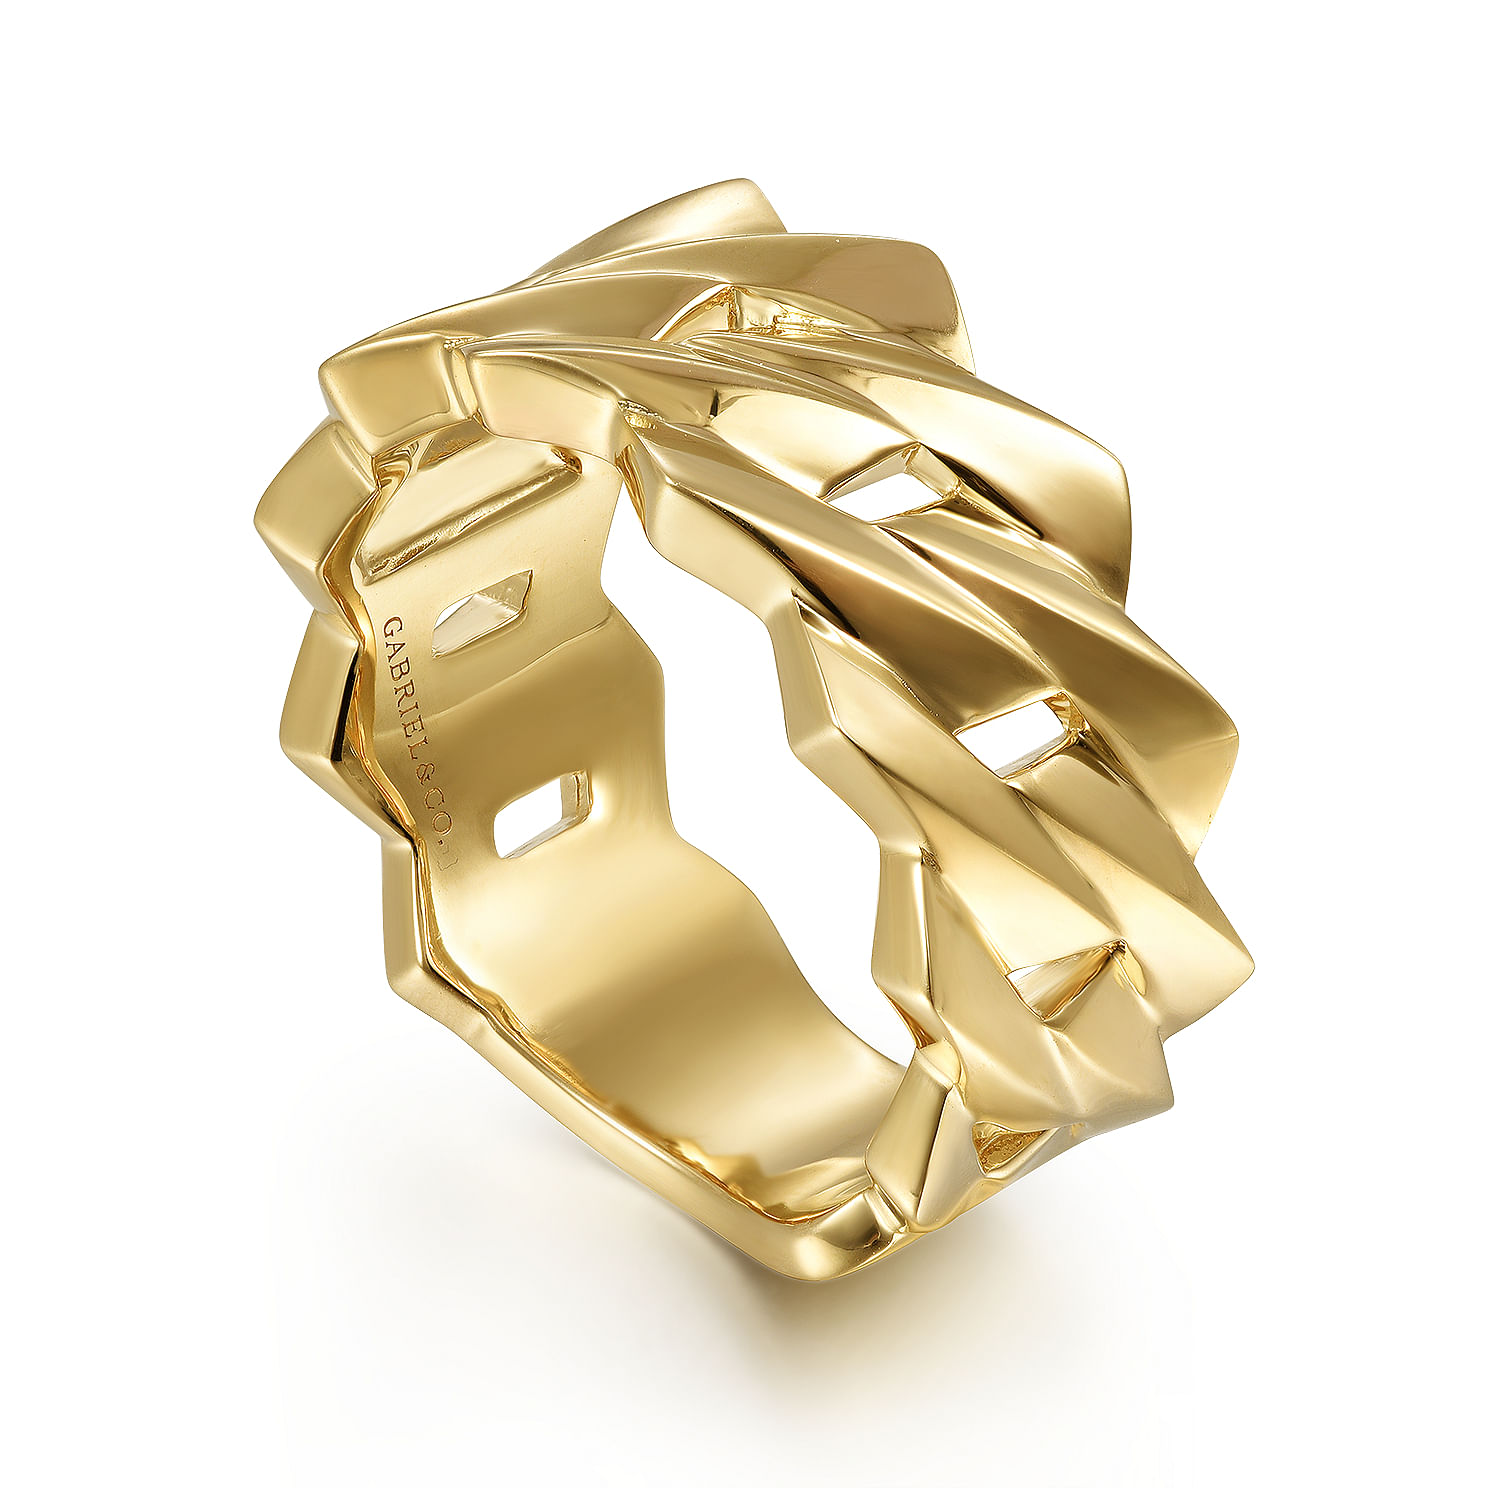 Wide 14K Yellow Gold Chain Link Band in High Polished Finish